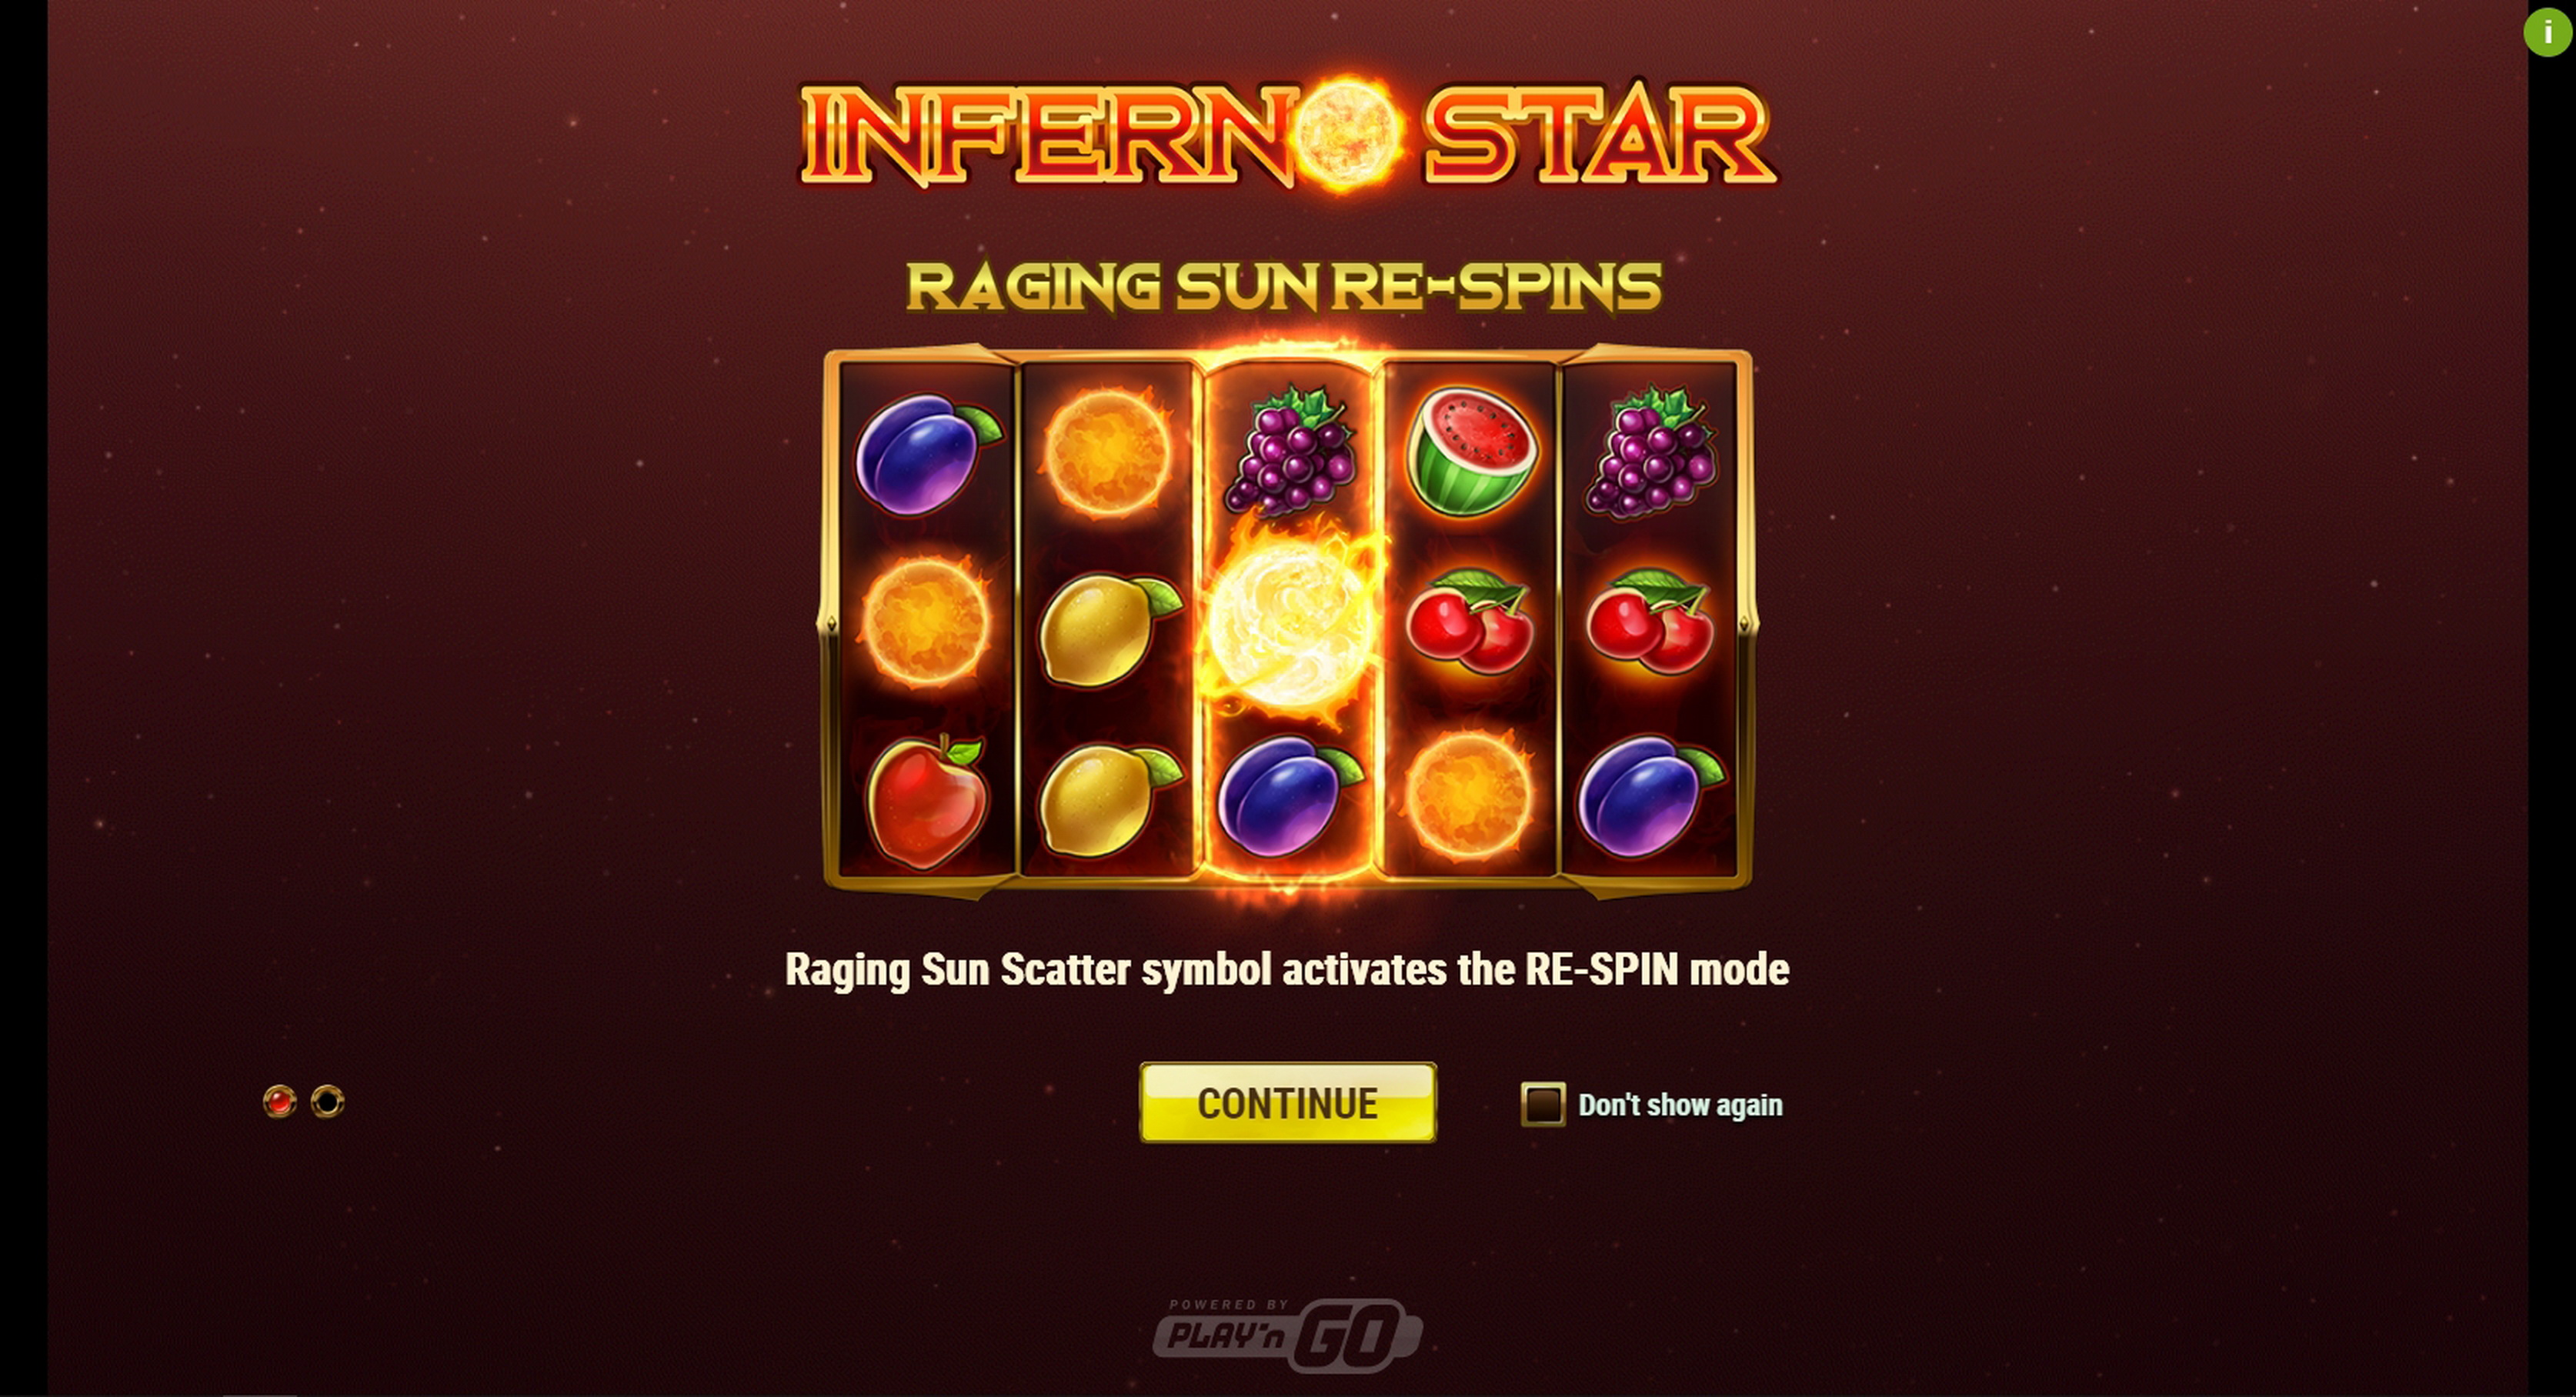 Play Inferno Star Free Casino Slot Game by Playn GO